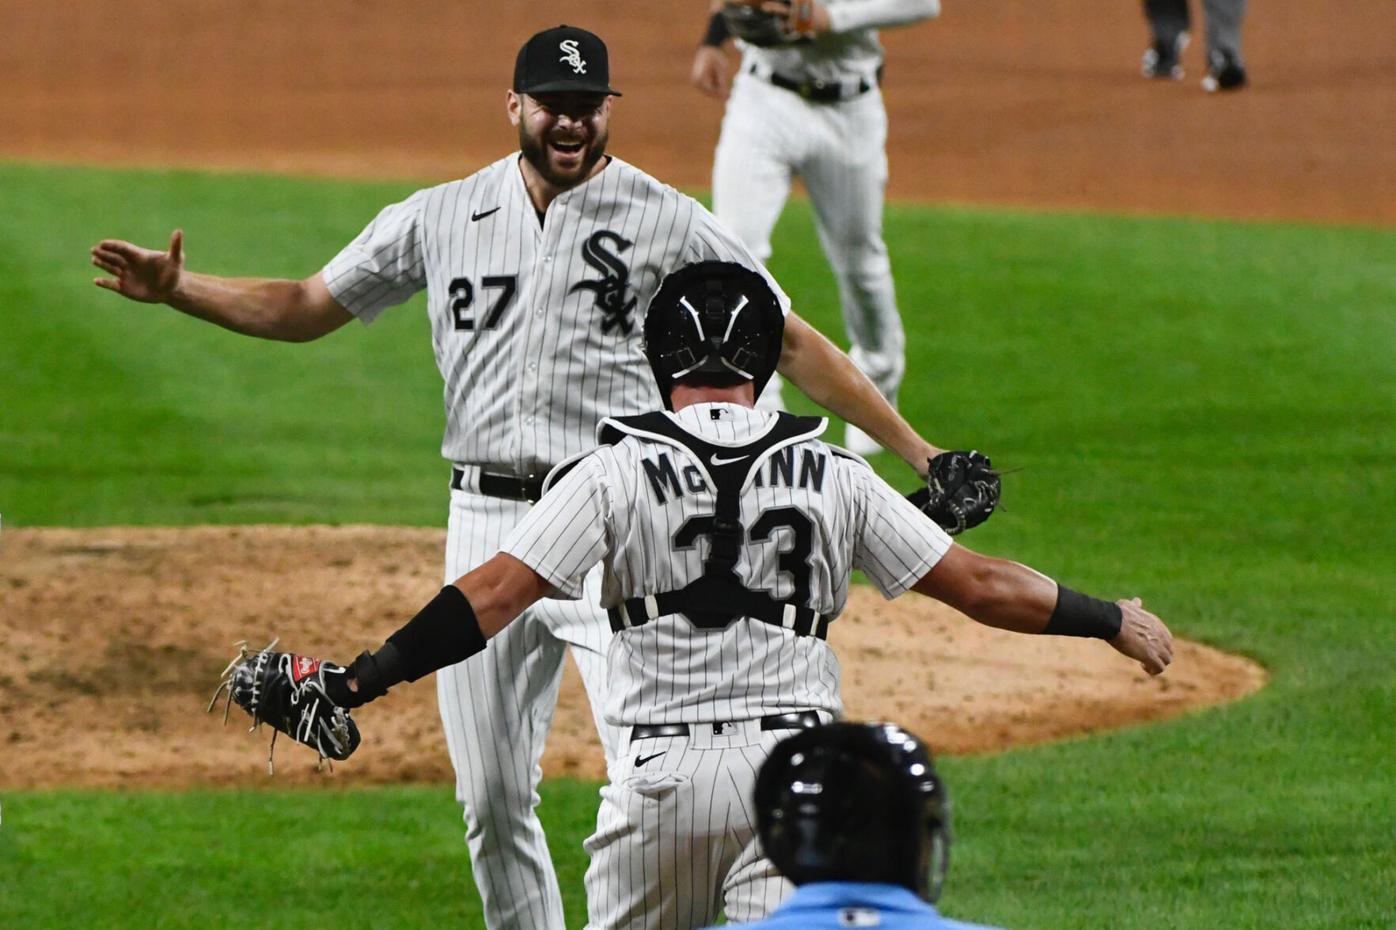 Local park helped White Sox hurler get on top of his game, Sports